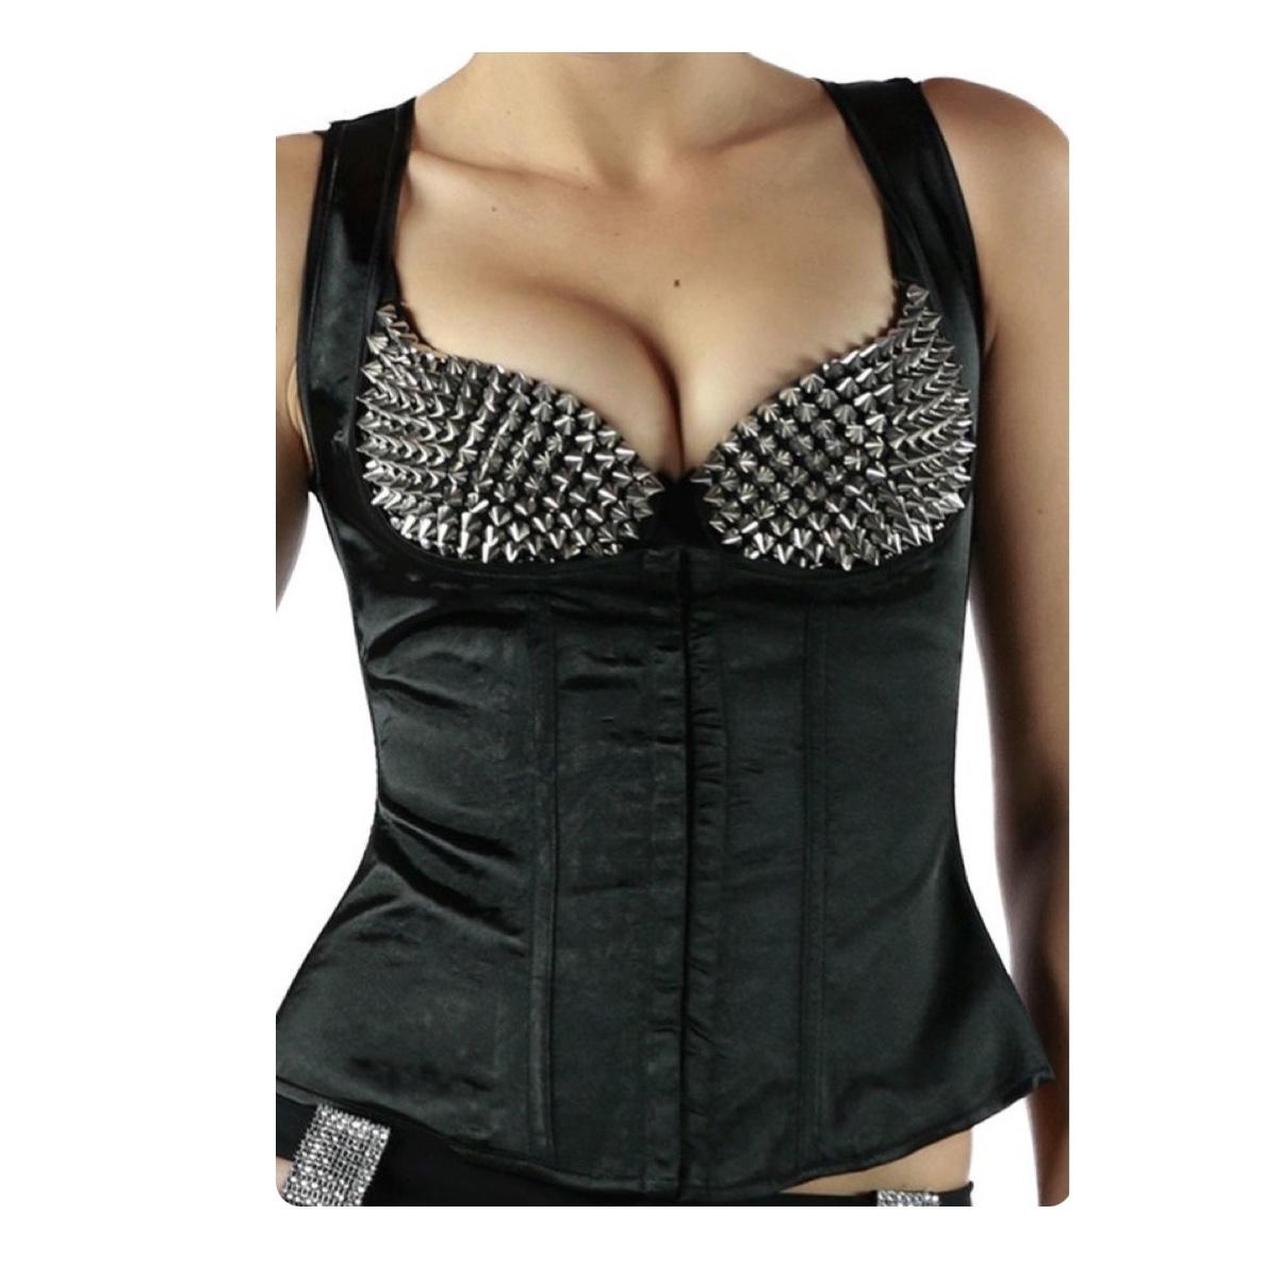 Corset Sexy and romantic corset perfect for any - Depop